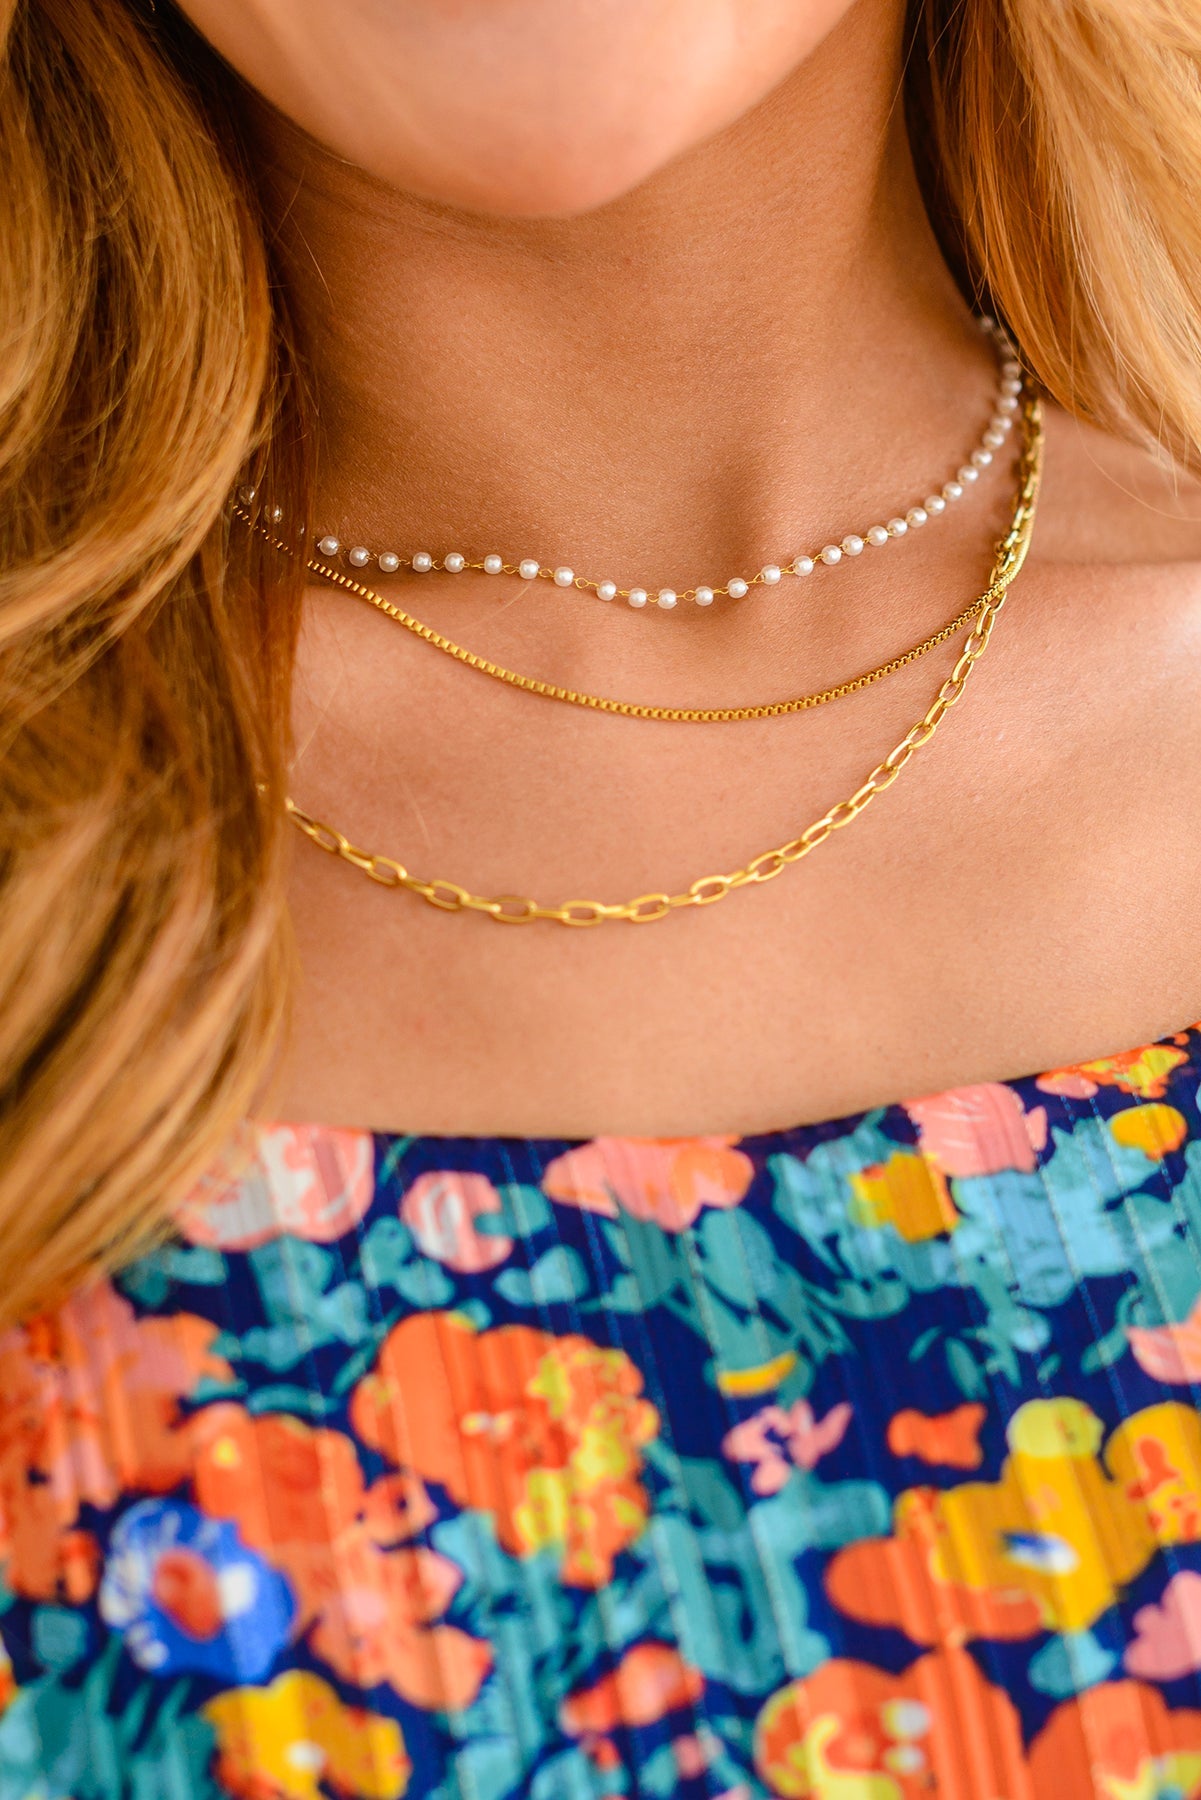 Triple Threat Layered Necklace - 4/23